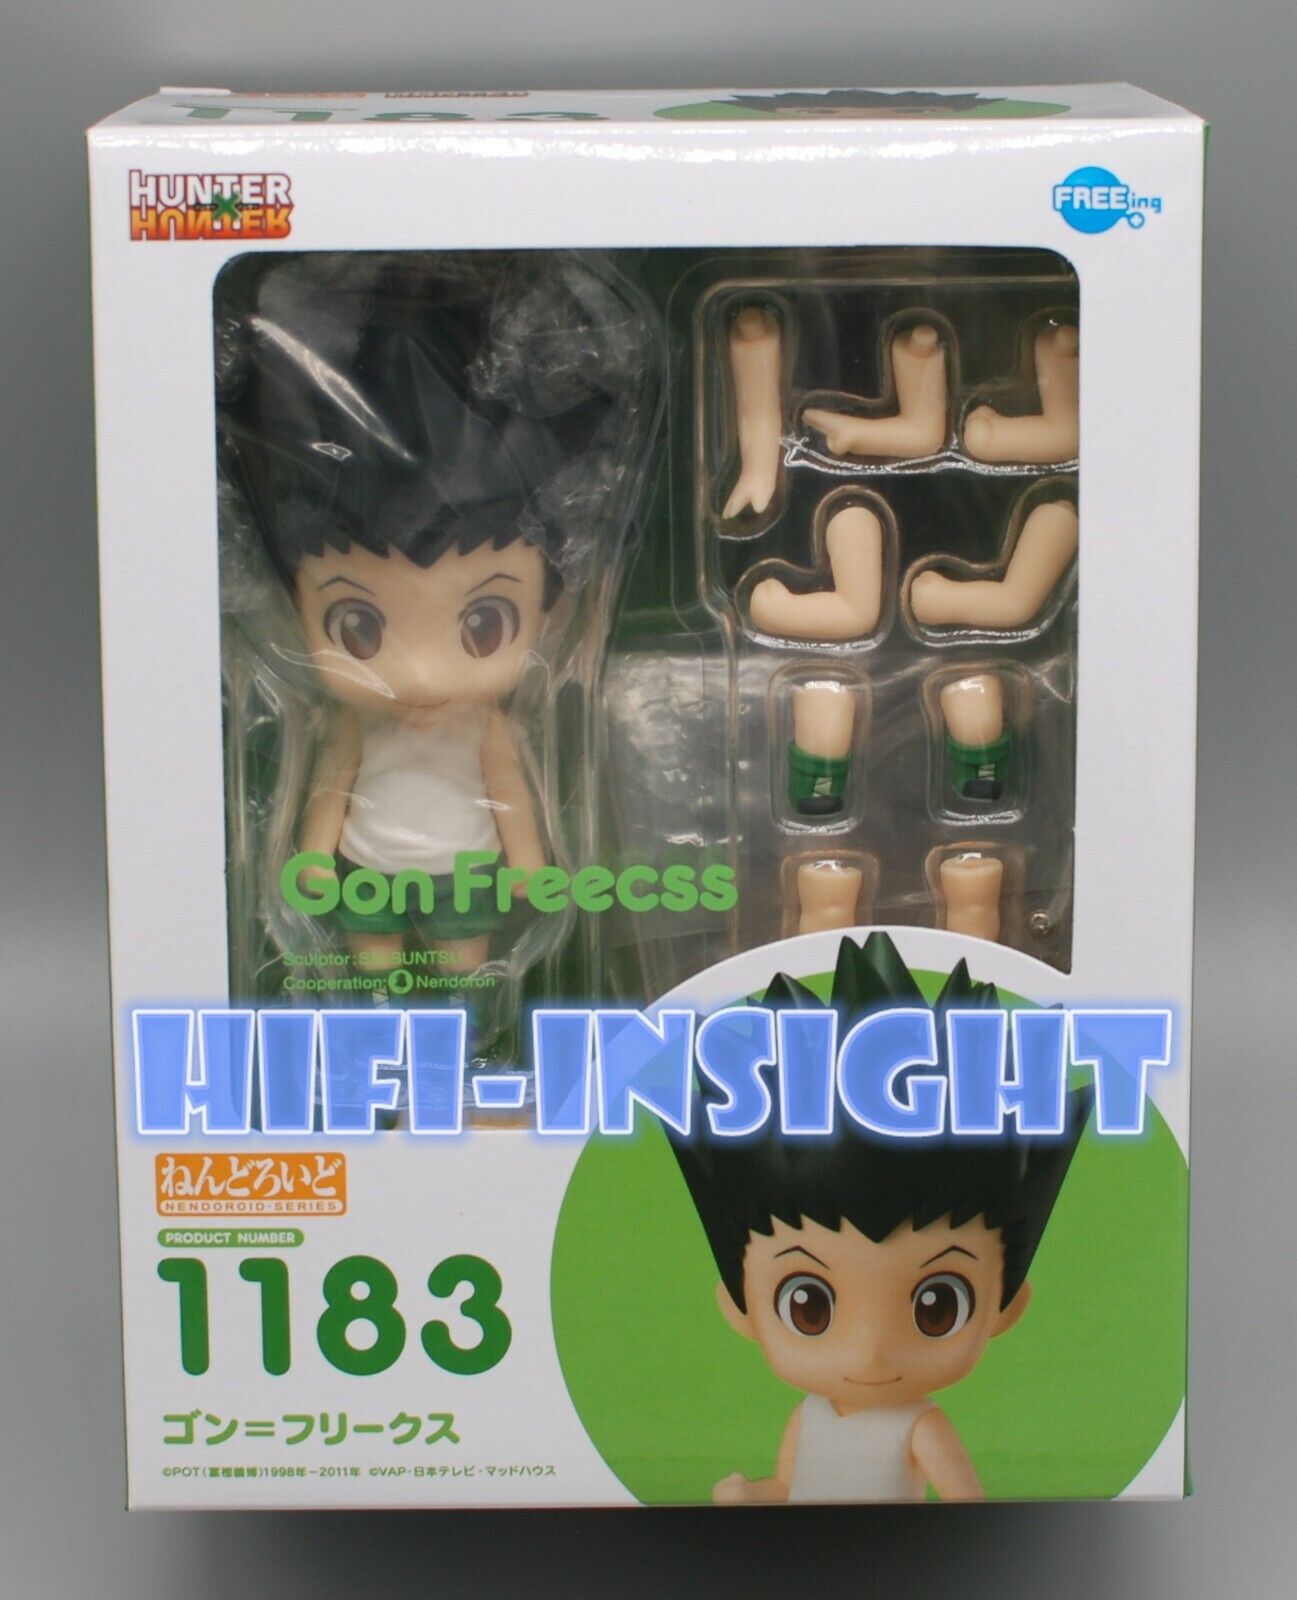 ✮Authentic✮ FREEing Hunter X Hunter: Nendoroid Gon Freecss Action Figure